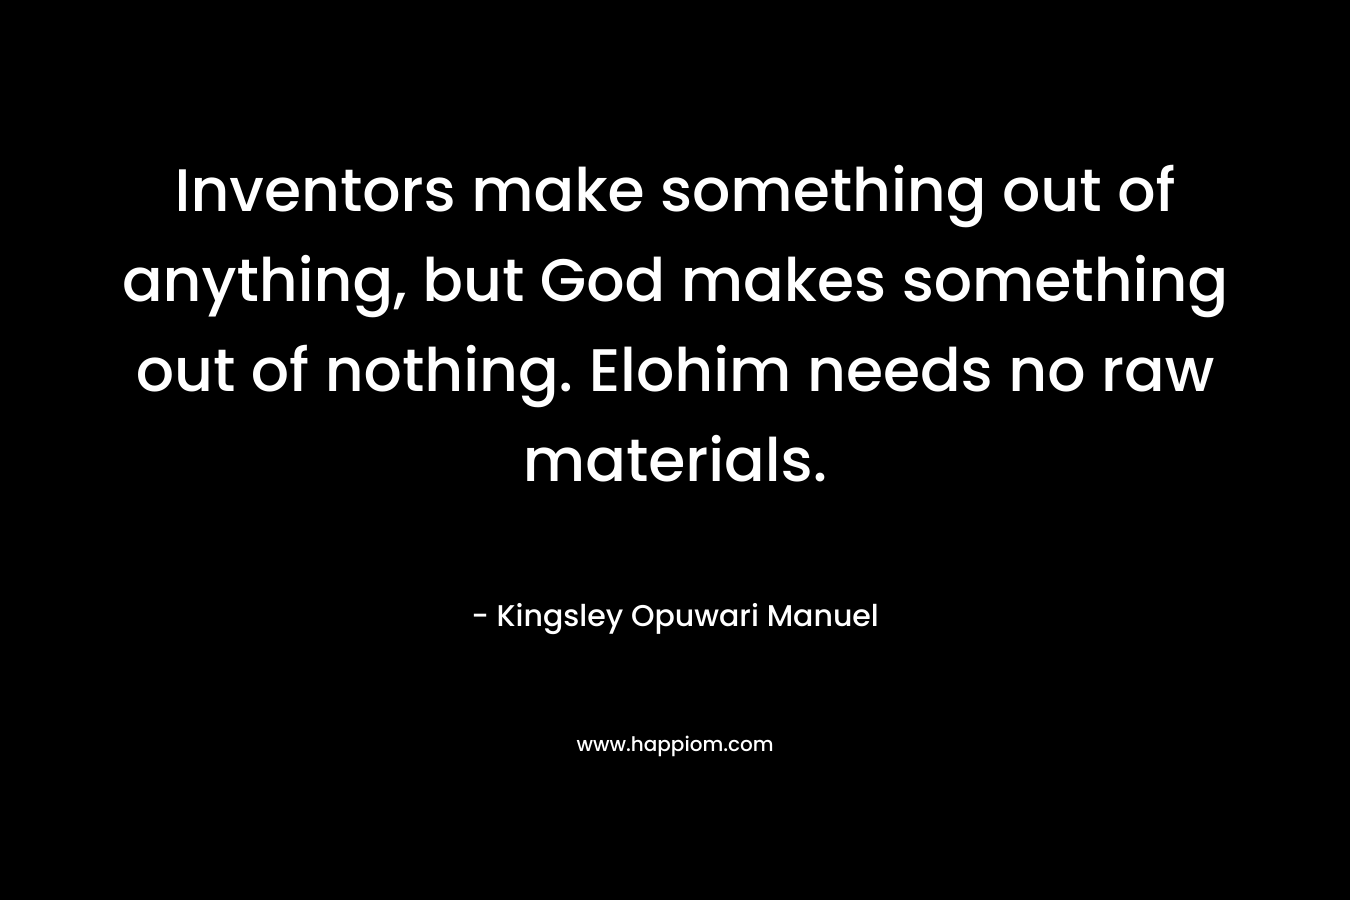 Inventors make something out of anything, but God makes something out of nothing. Elohim needs no raw materials. – Kingsley Opuwari Manuel